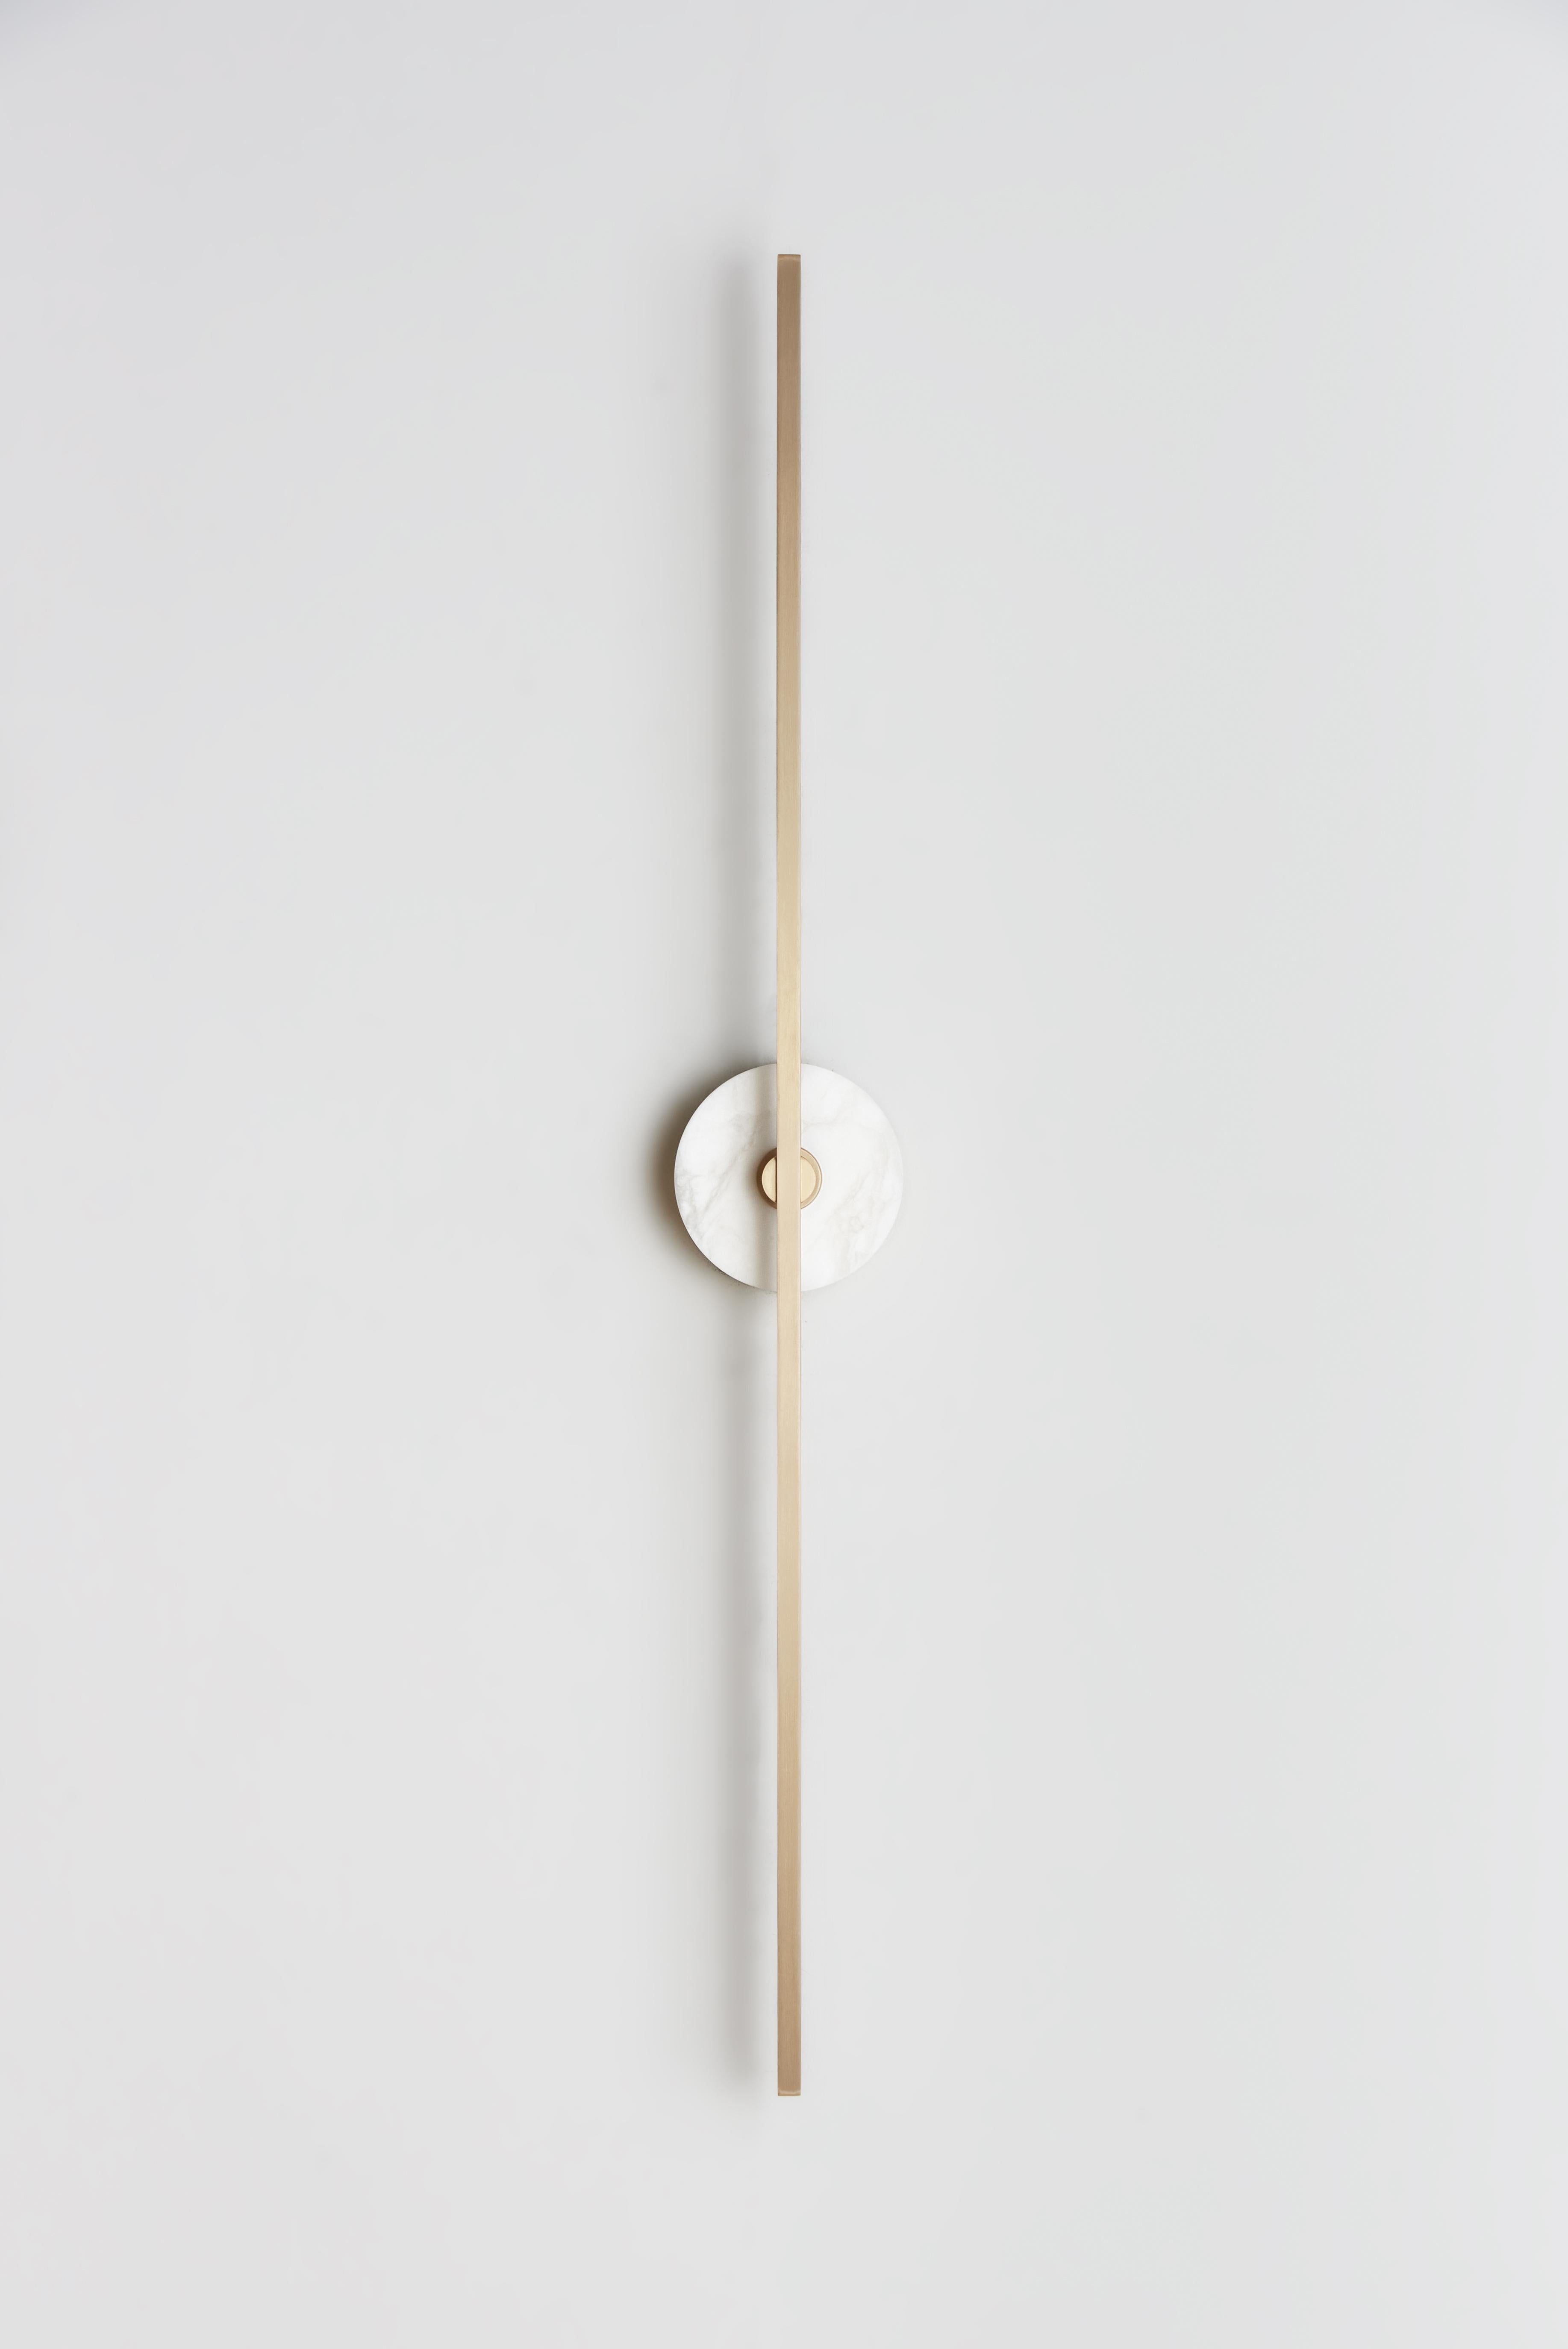 The Grand Stick wall sconce is a stylish and functional lighting fixture that blends minimalist design with advanced LED technology. The use of brass profiles gives it a sleek and elegant look, while the LED lights provide warm and diffused lighting